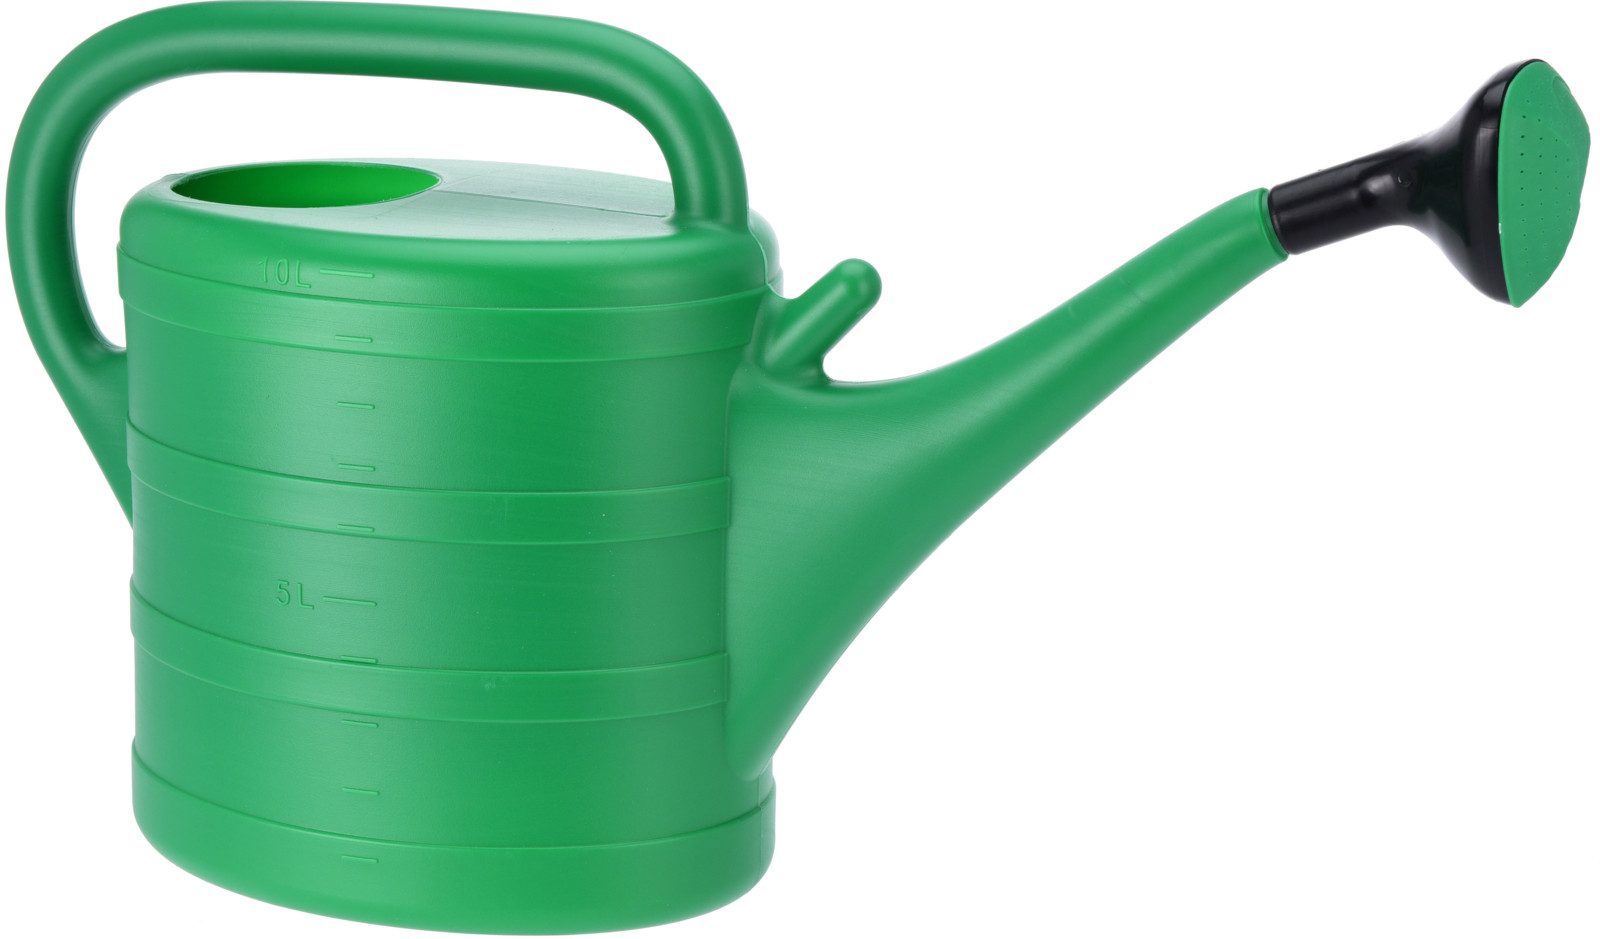 WATERING CAN GREEN 10L